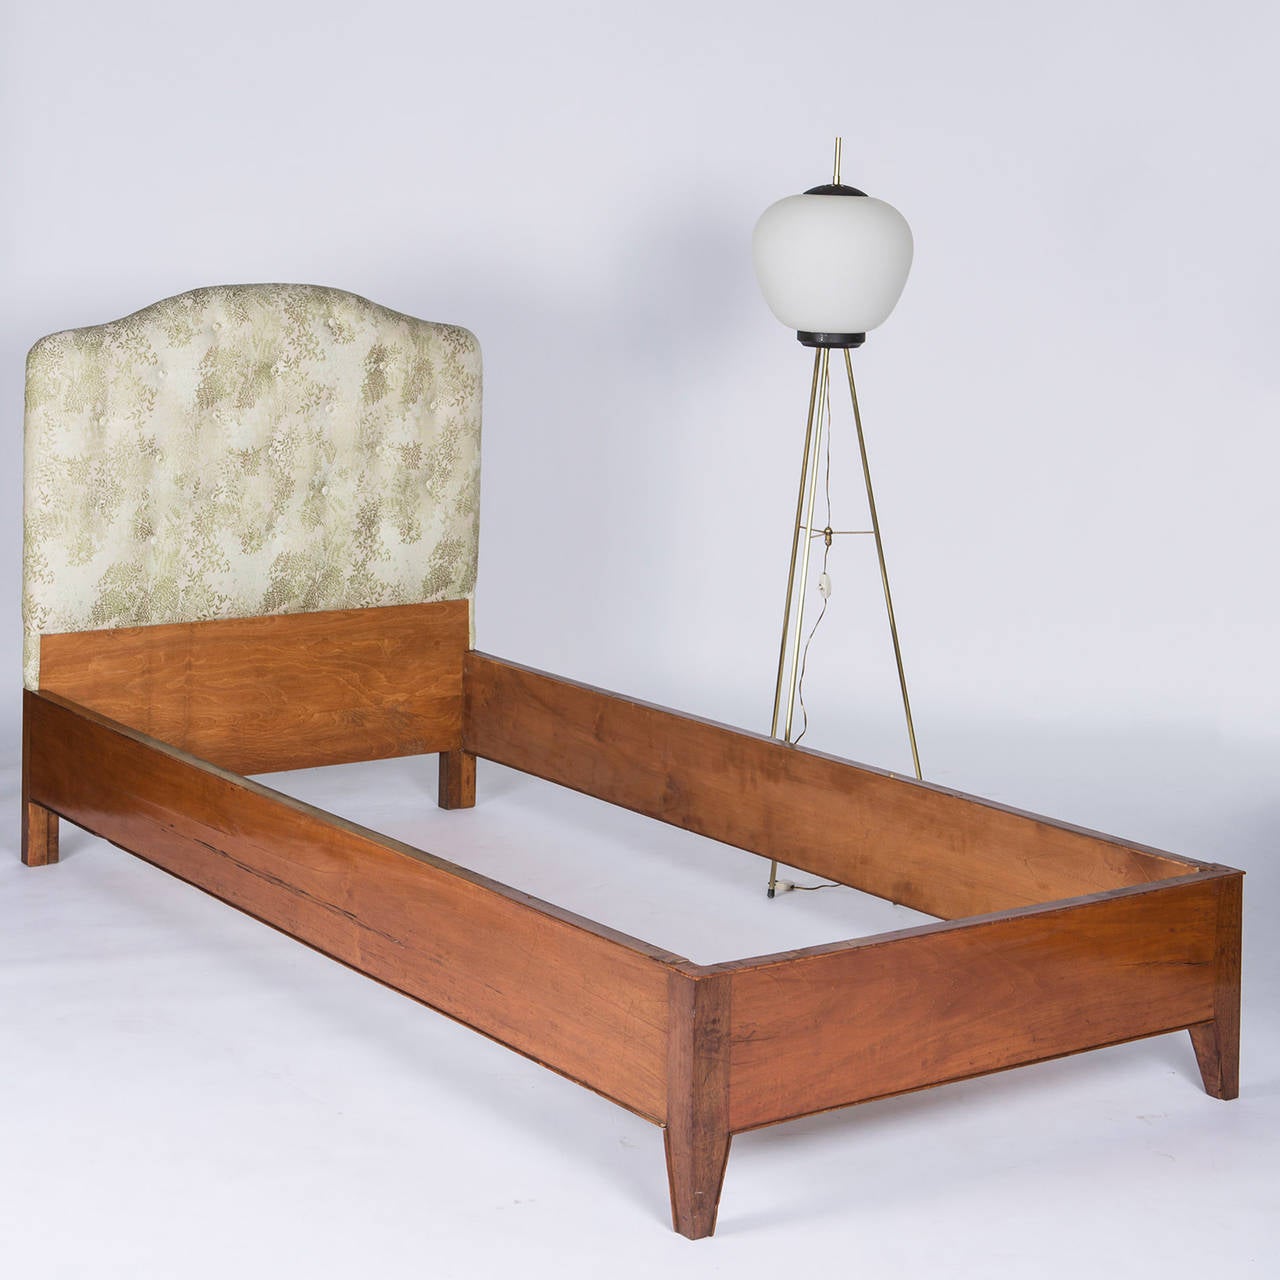 Set of Two Wood Single Beds by Gio Ponti, Italy, 1940s For Sale 2